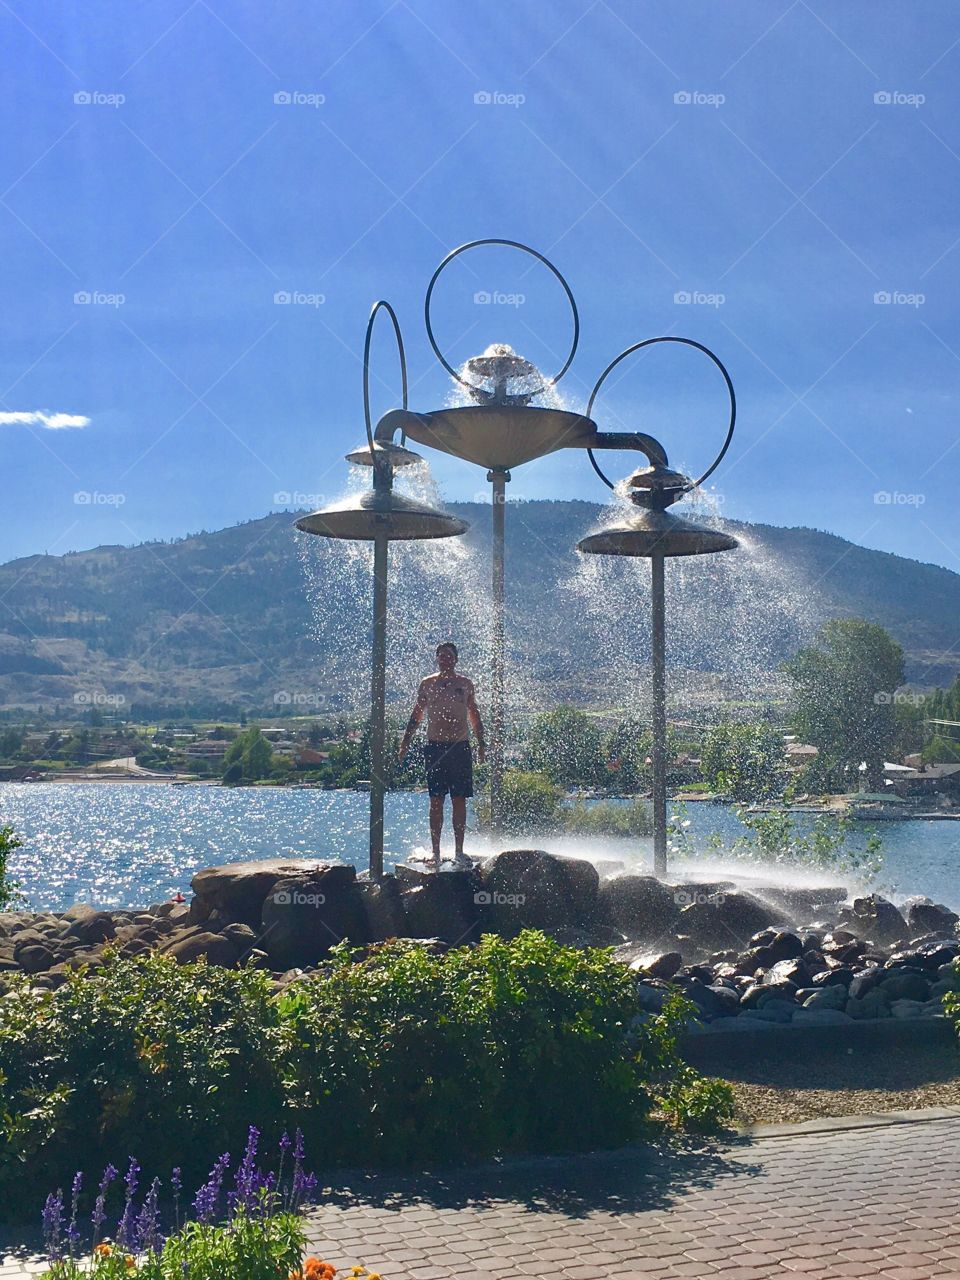 Cooling down in an outdoor water feature in Kelowna, British Columbia 